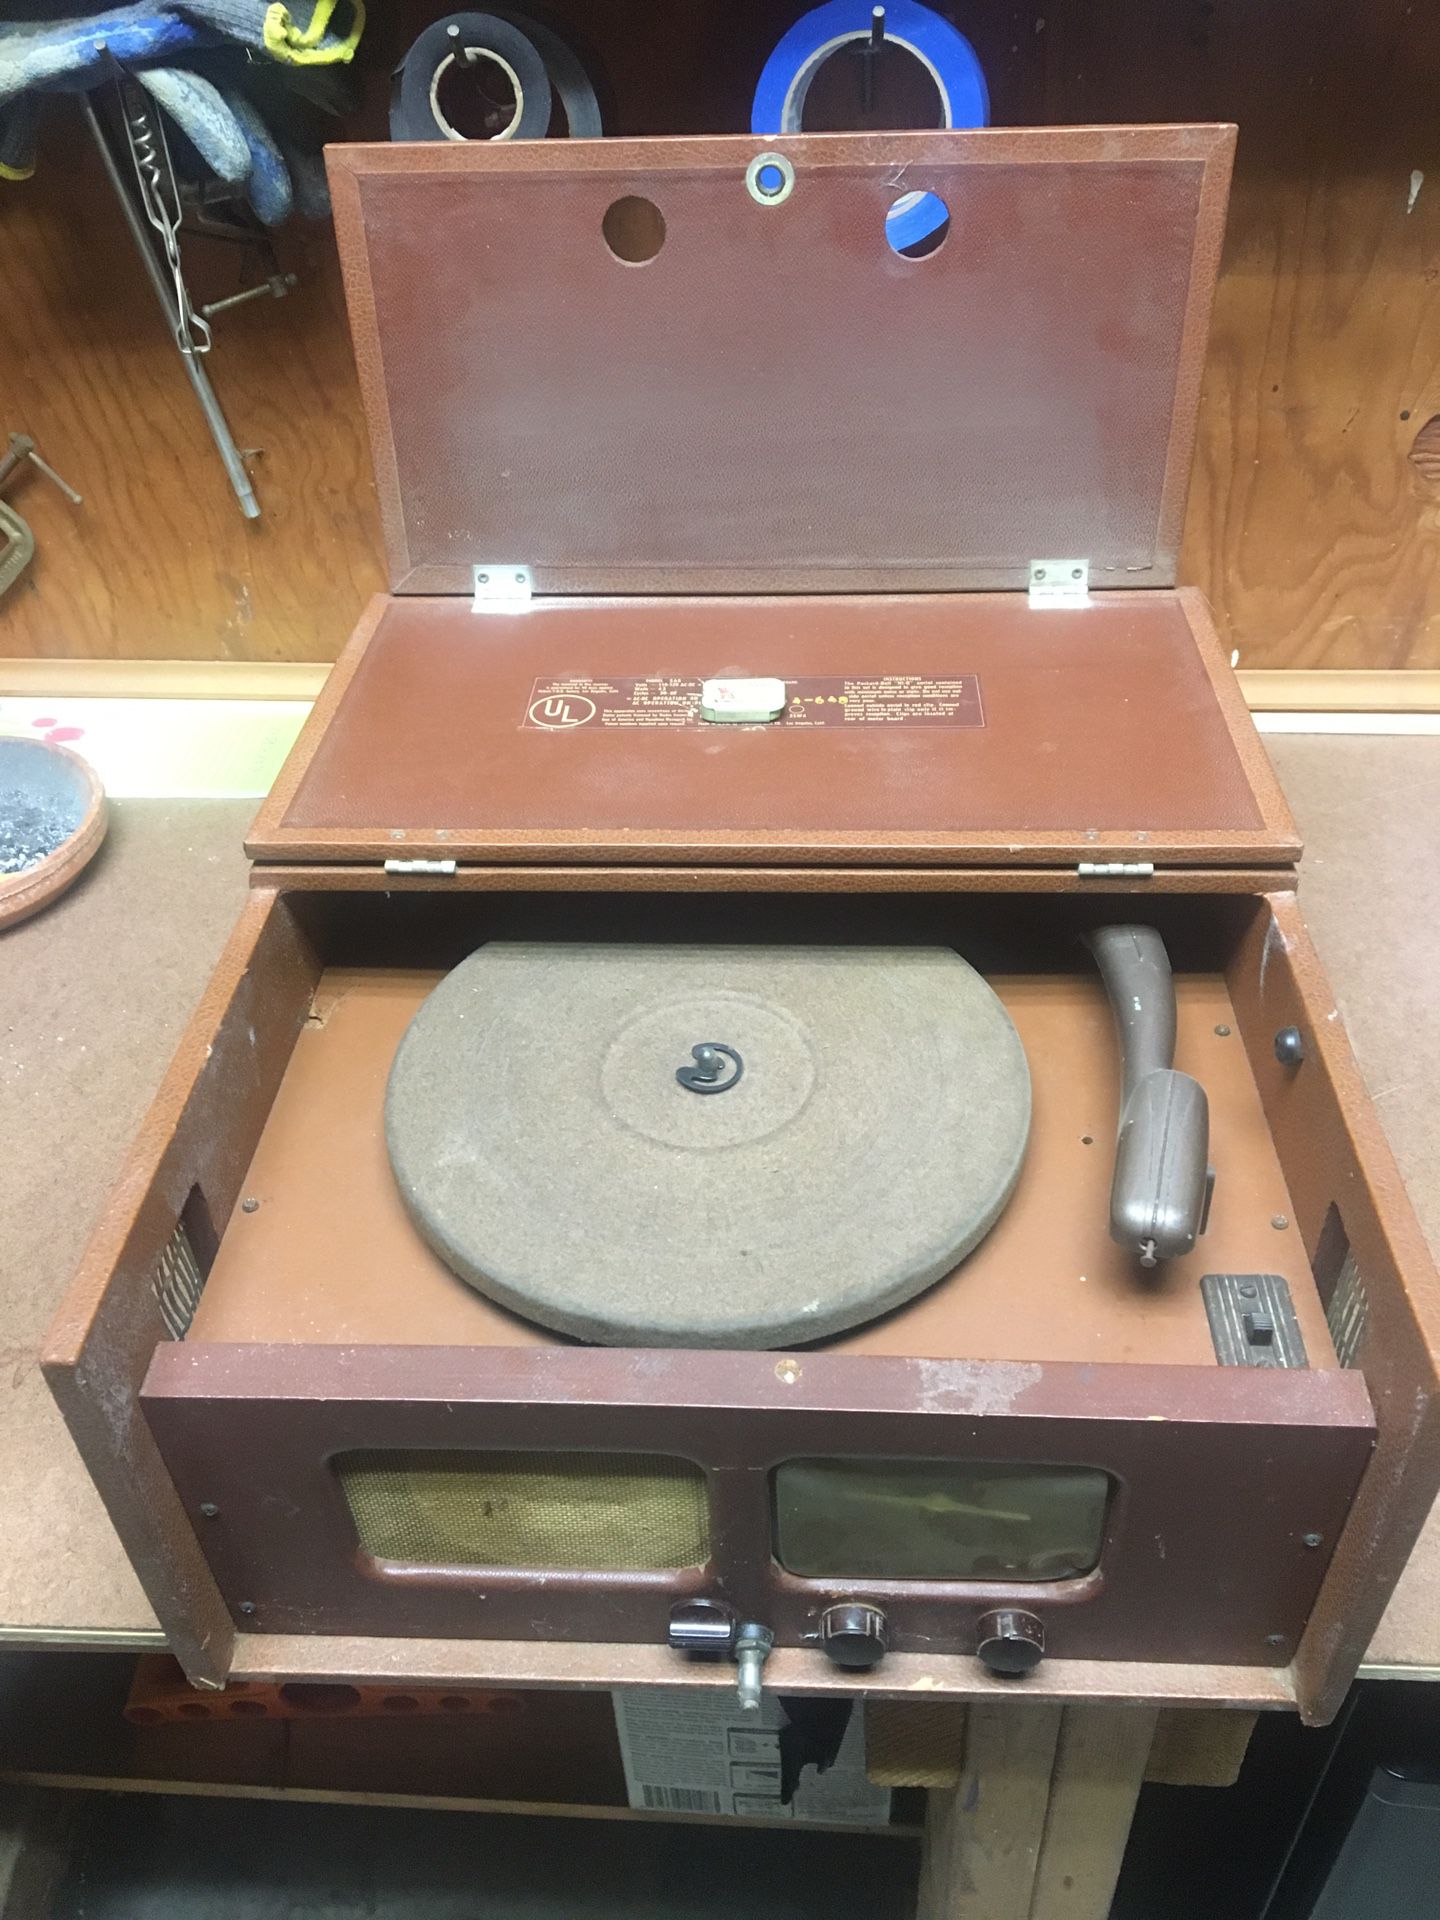 Packard Bell model 568 record player